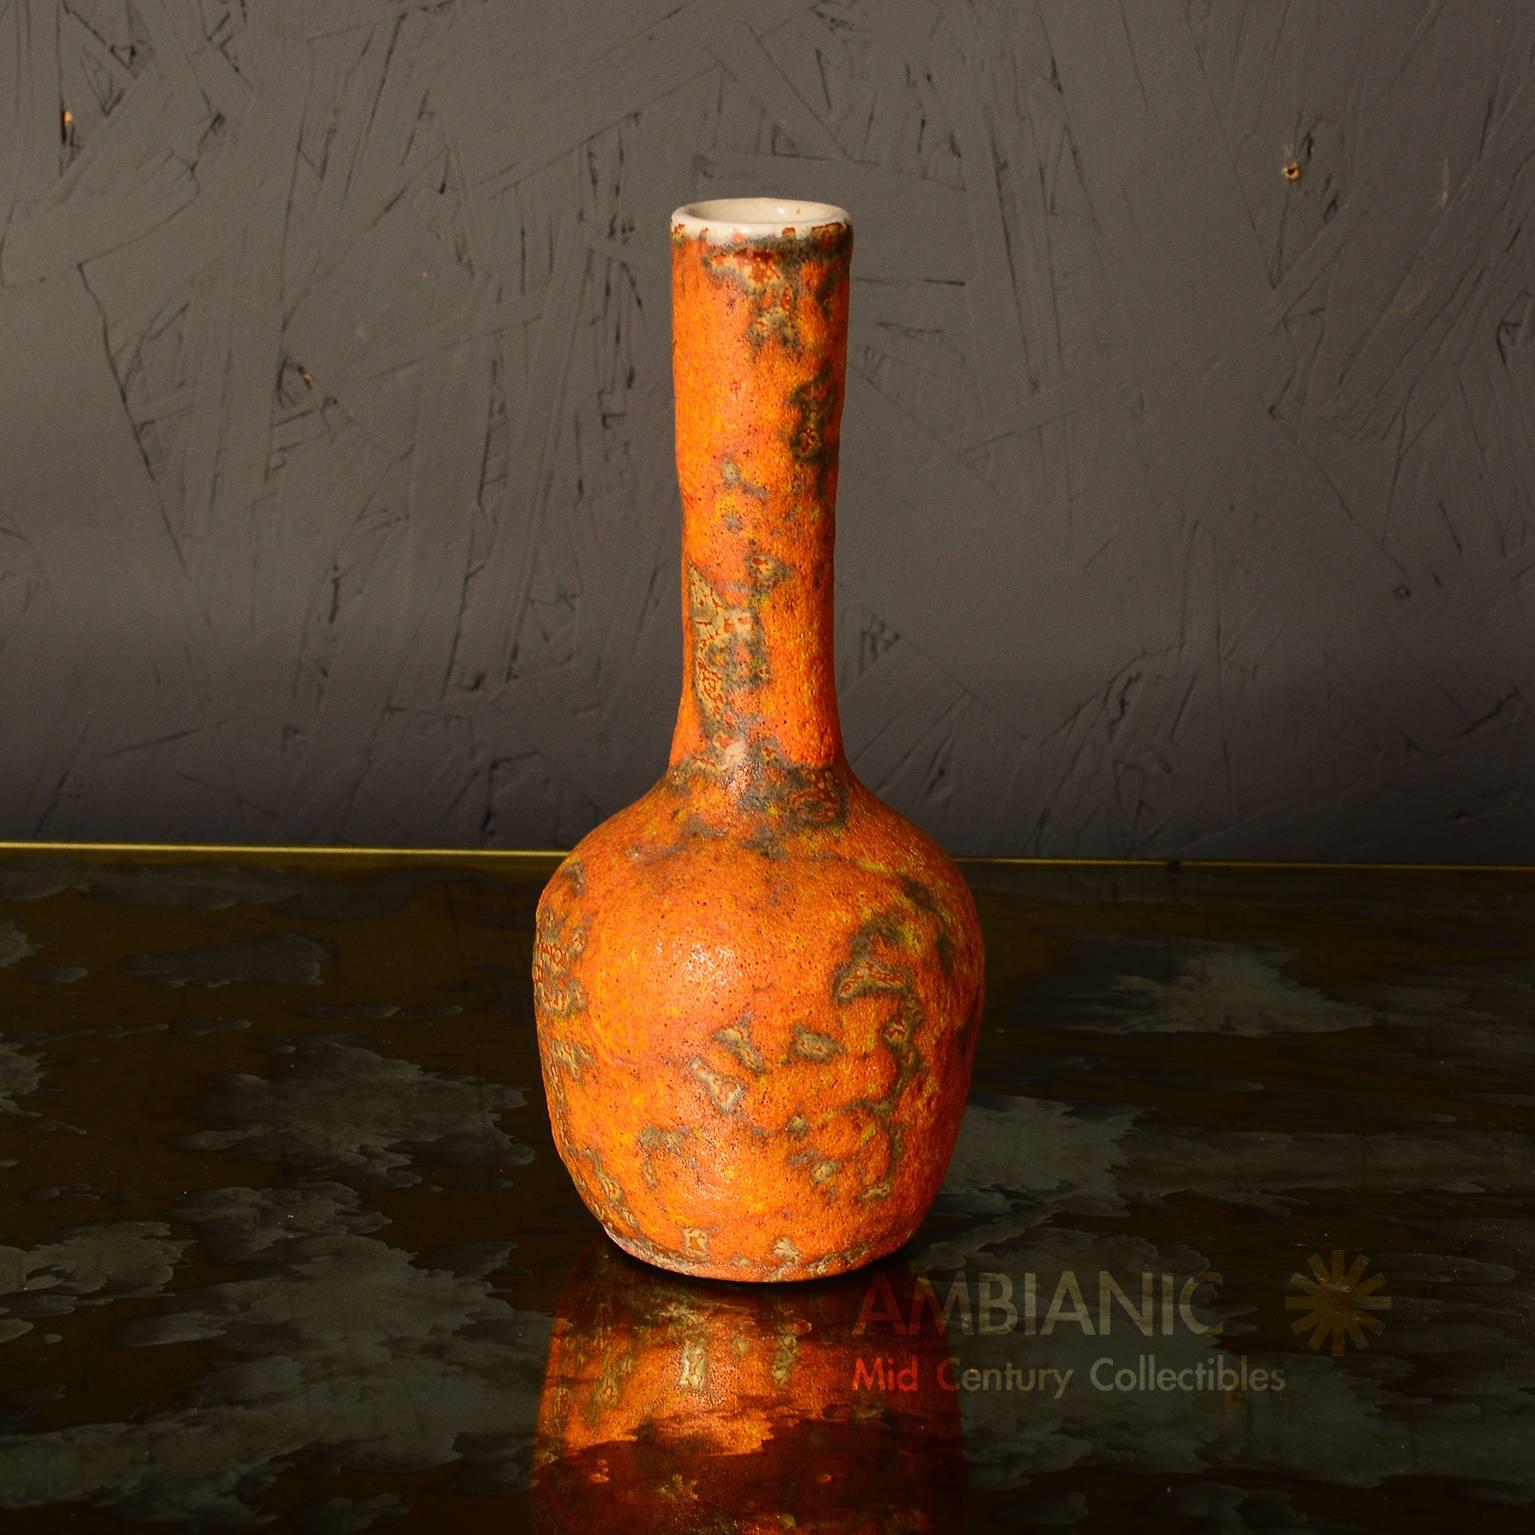 For your consideration a vintage ceramic pottery with long neck. 

Dominant color is orange with volcanic texture. 

7